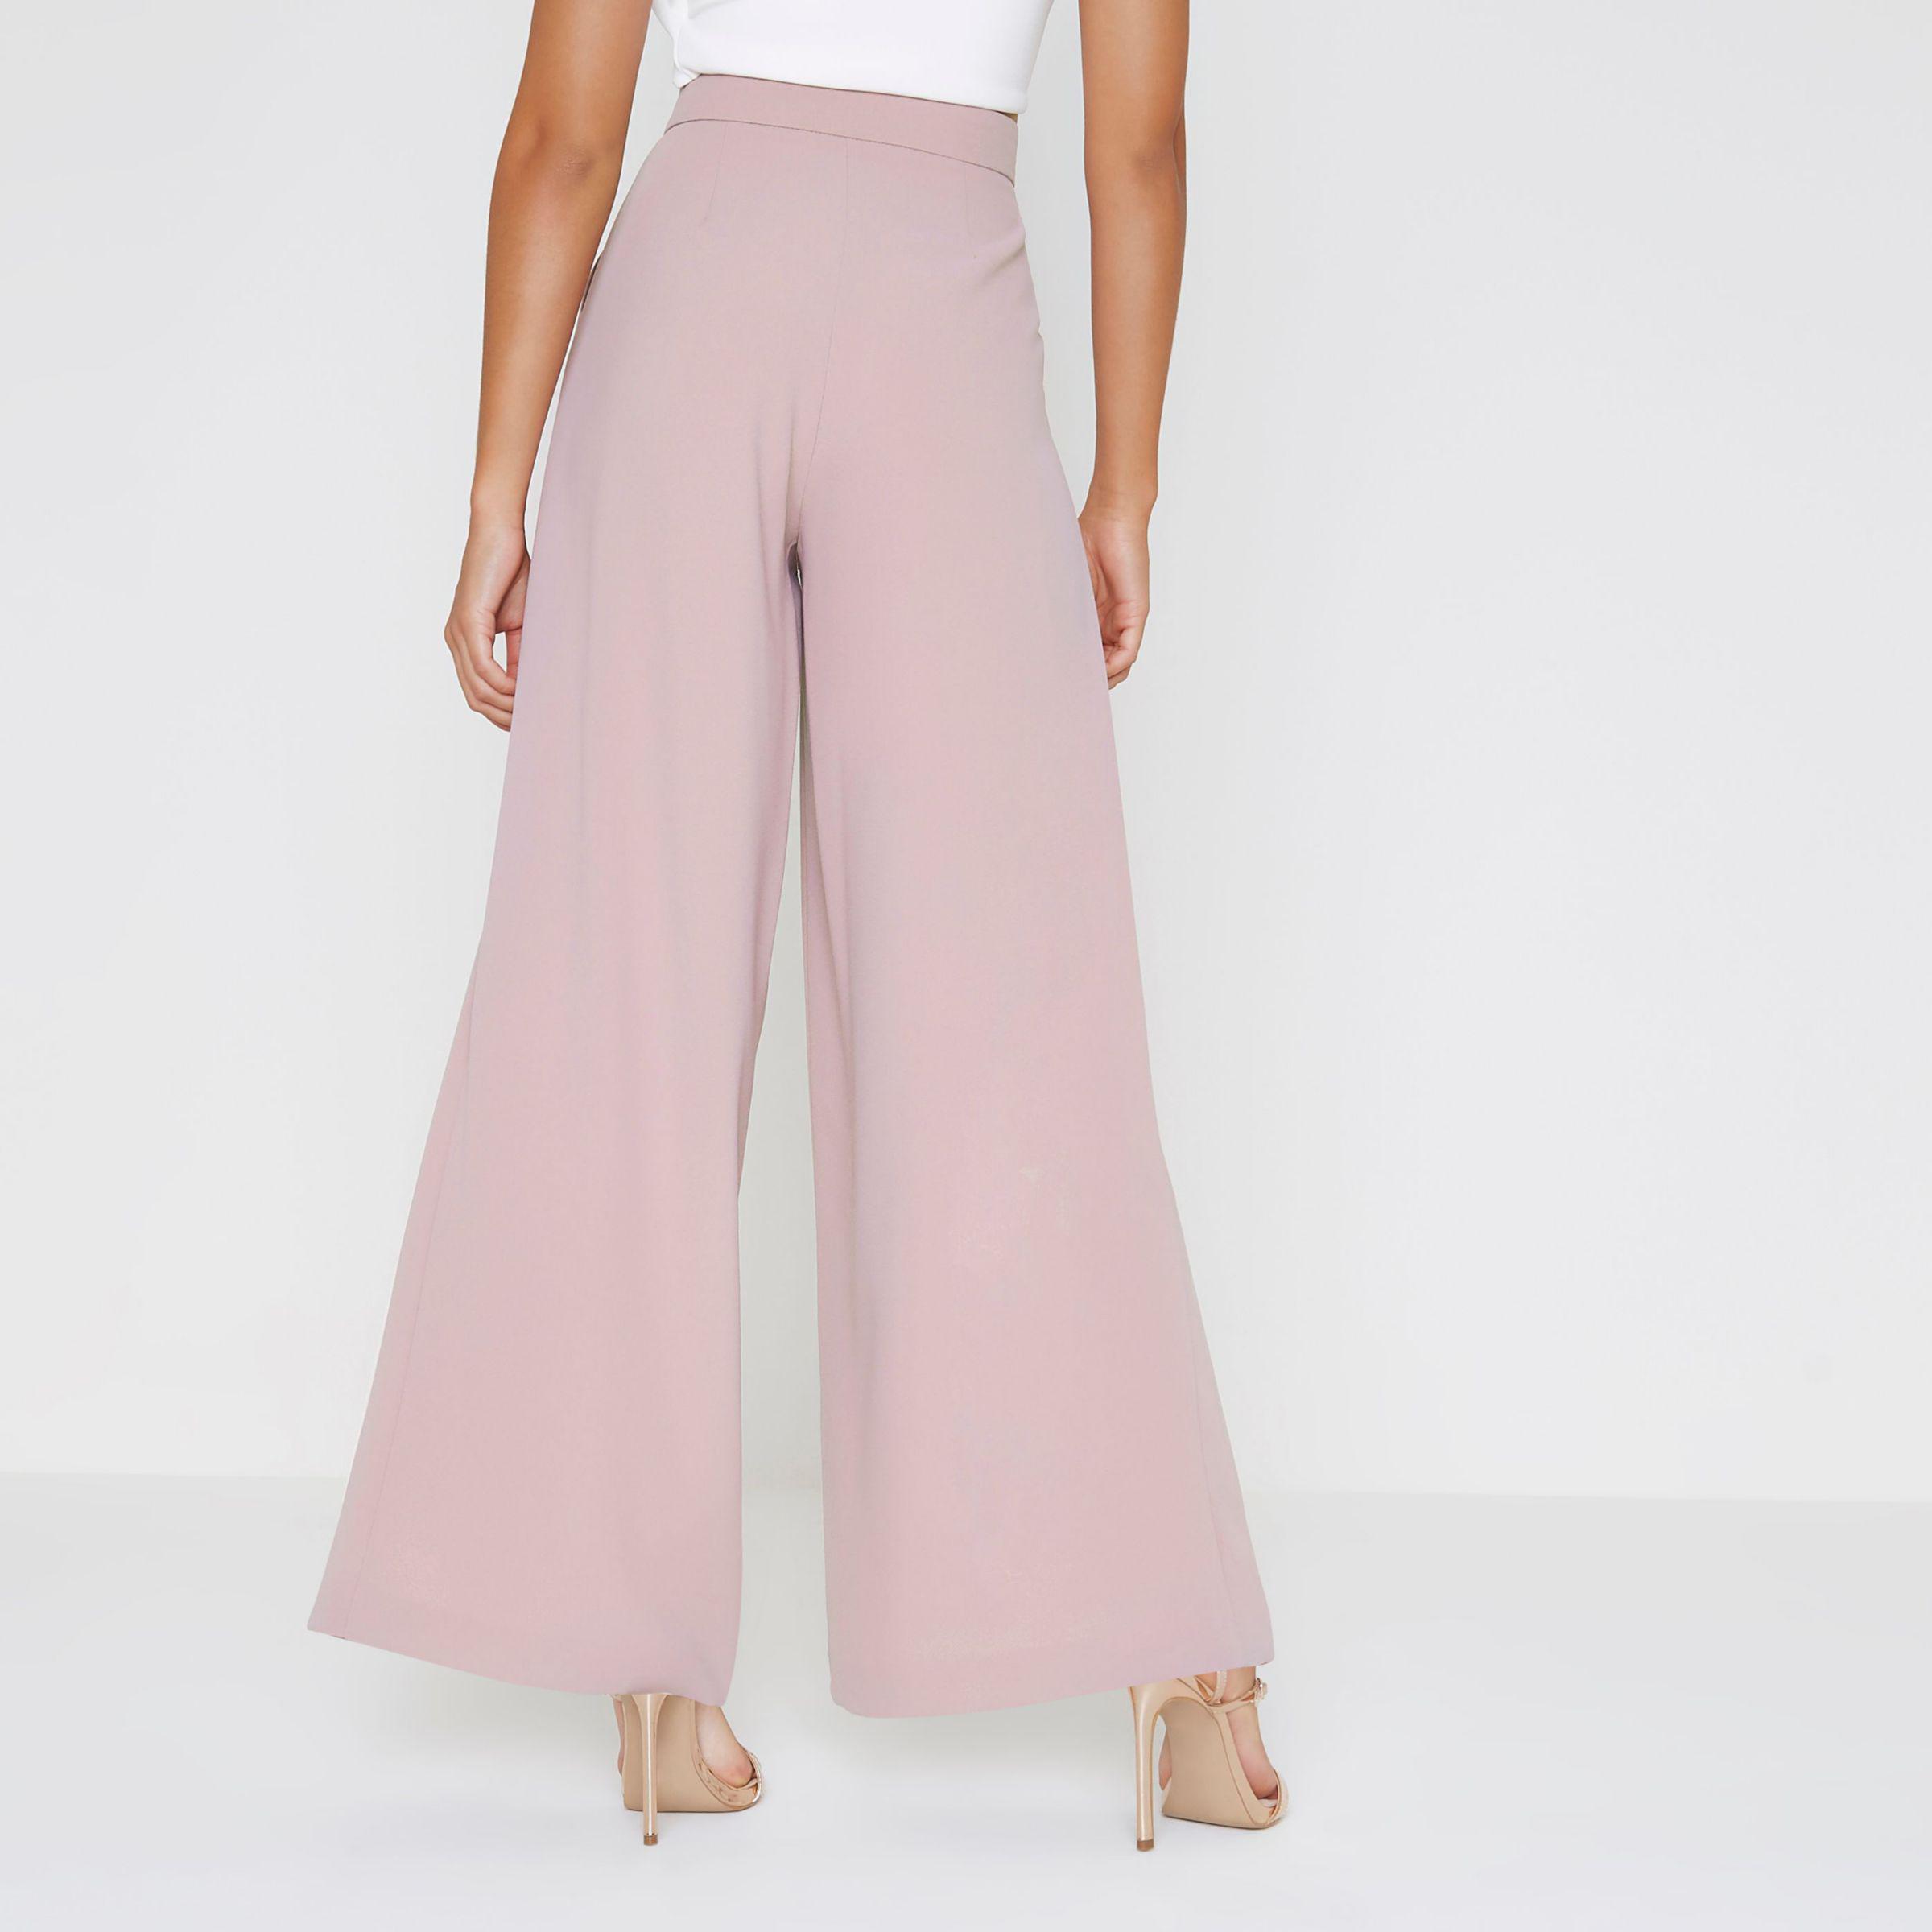 River Island Synthetic Light Wide Leg Trousers in Pink - Lyst